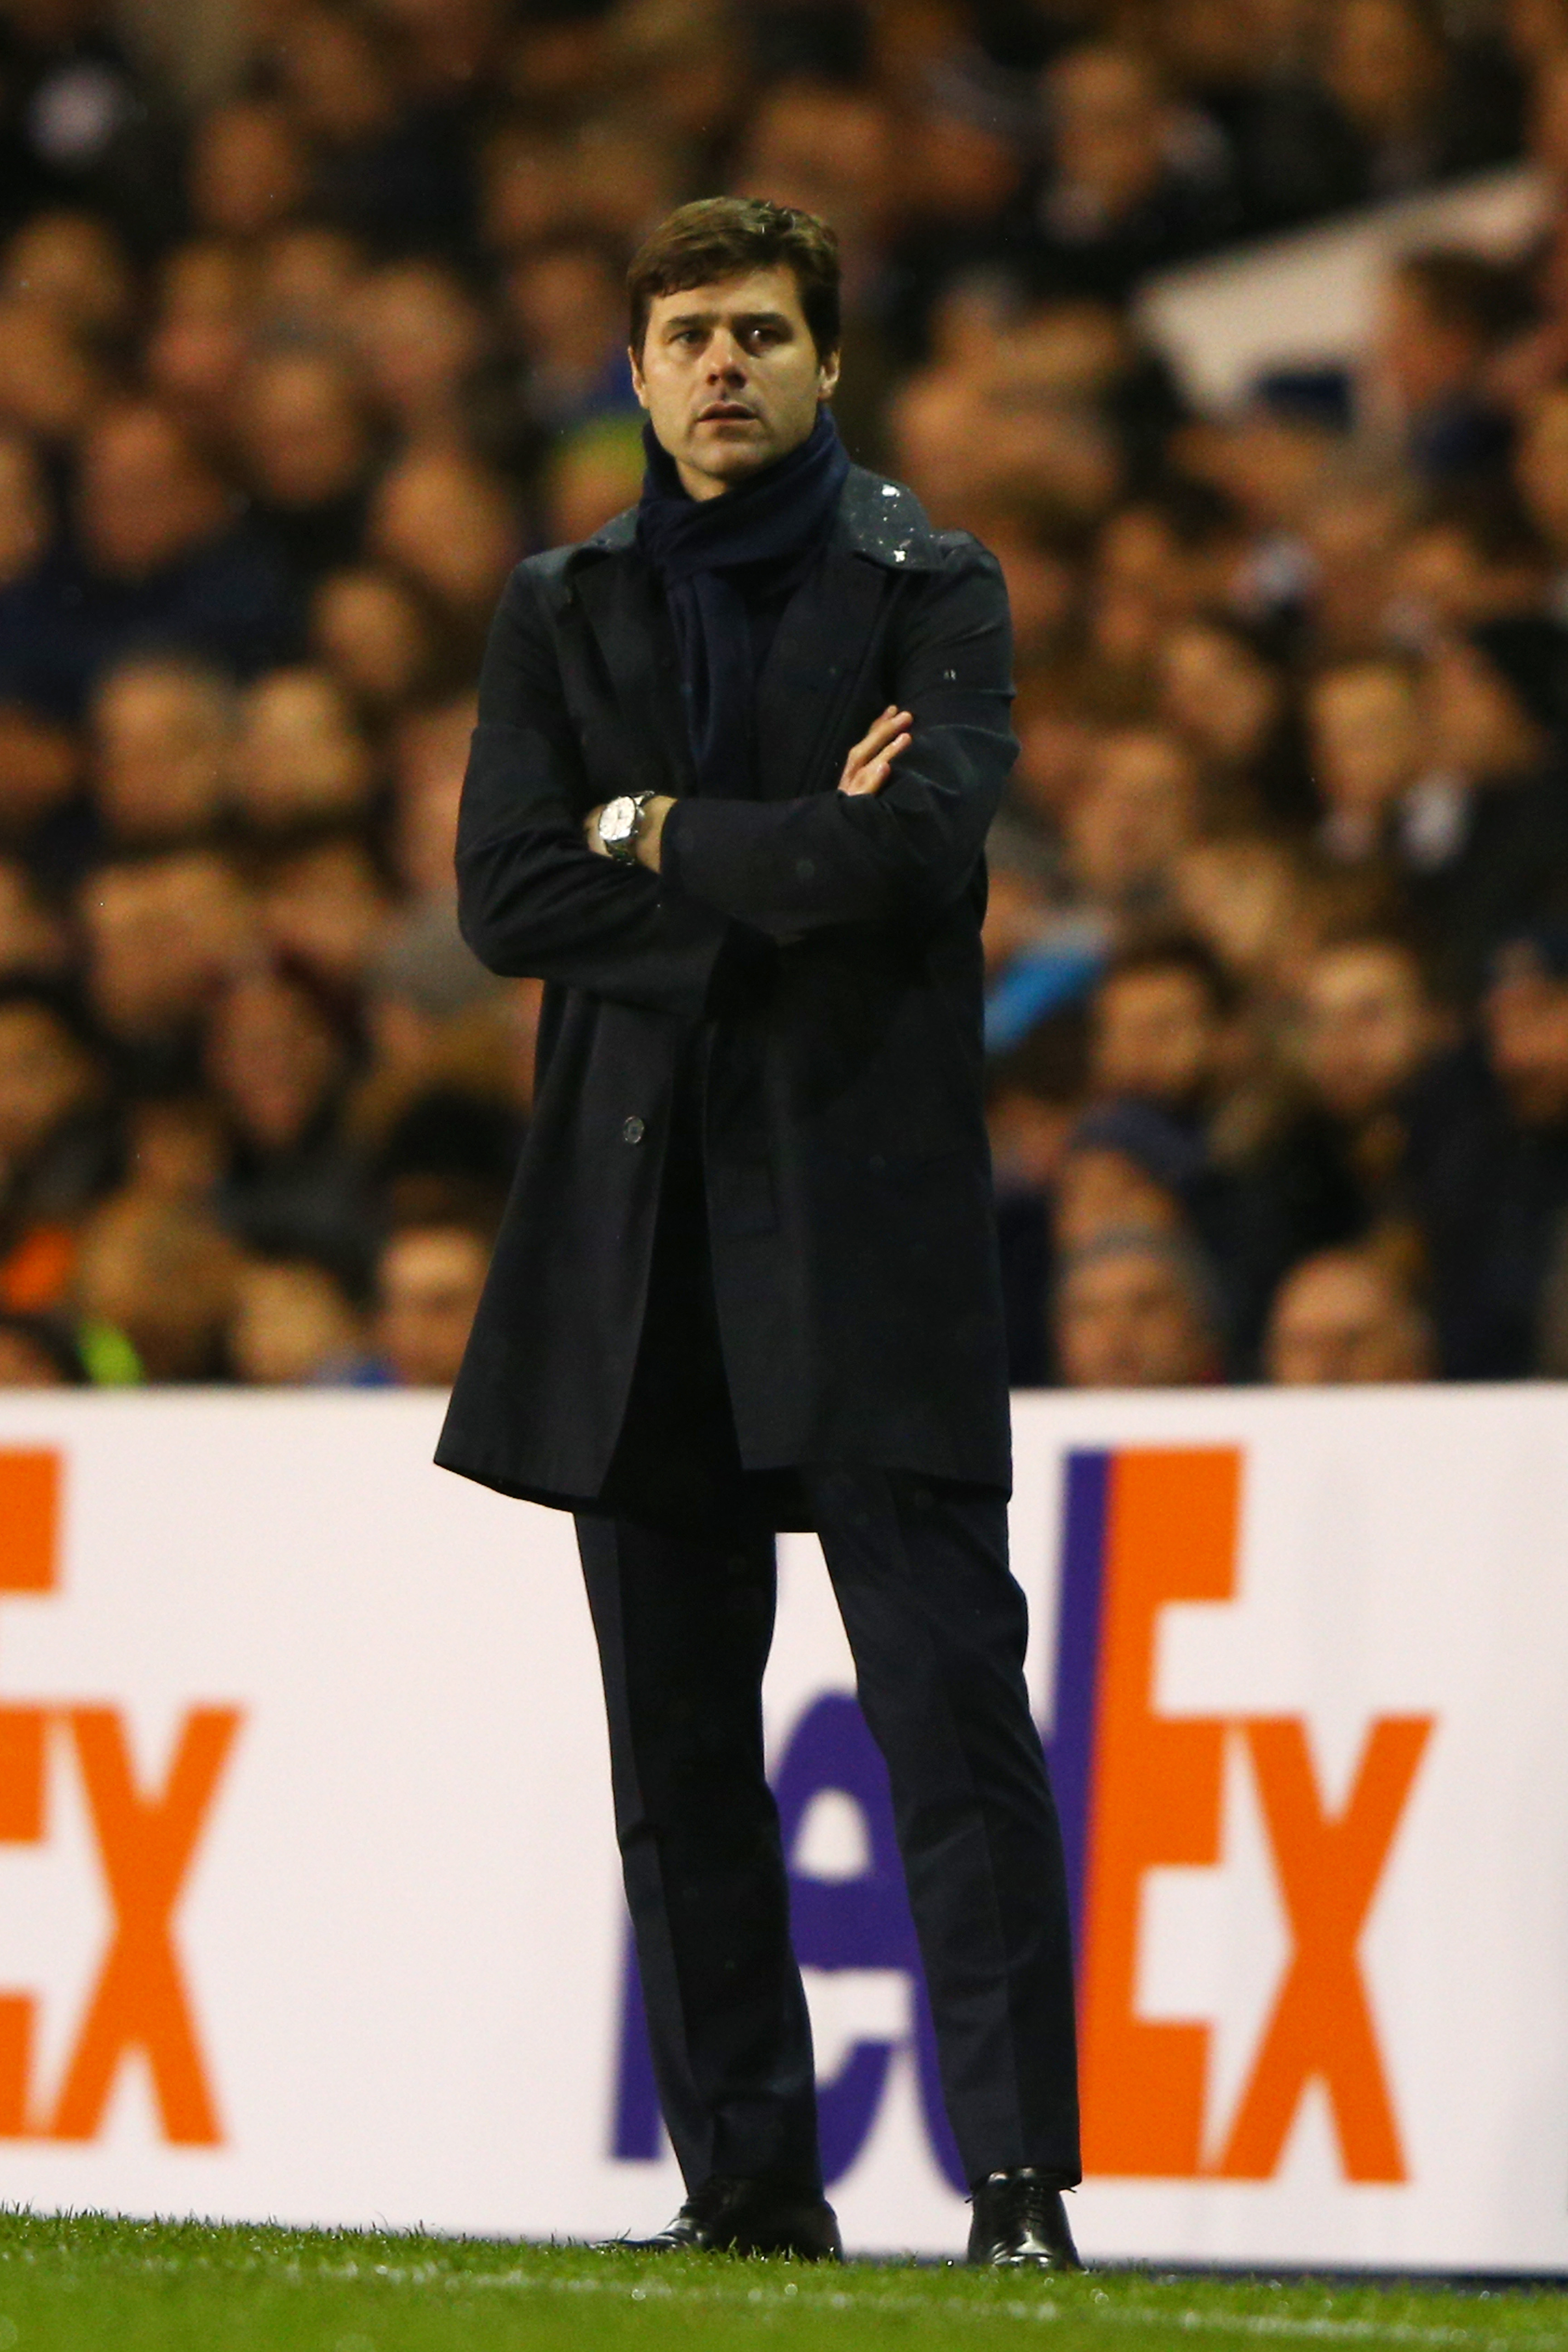 Mauricio Pochettino the manager of Spurs looks on during the UEFA Europa League Group J match between Tottenham Hotspur and AS Monaco at White Hart Lane on December 10, 2015 in London, United Kingdom. (Photo by Ian Walton/Getty Images)